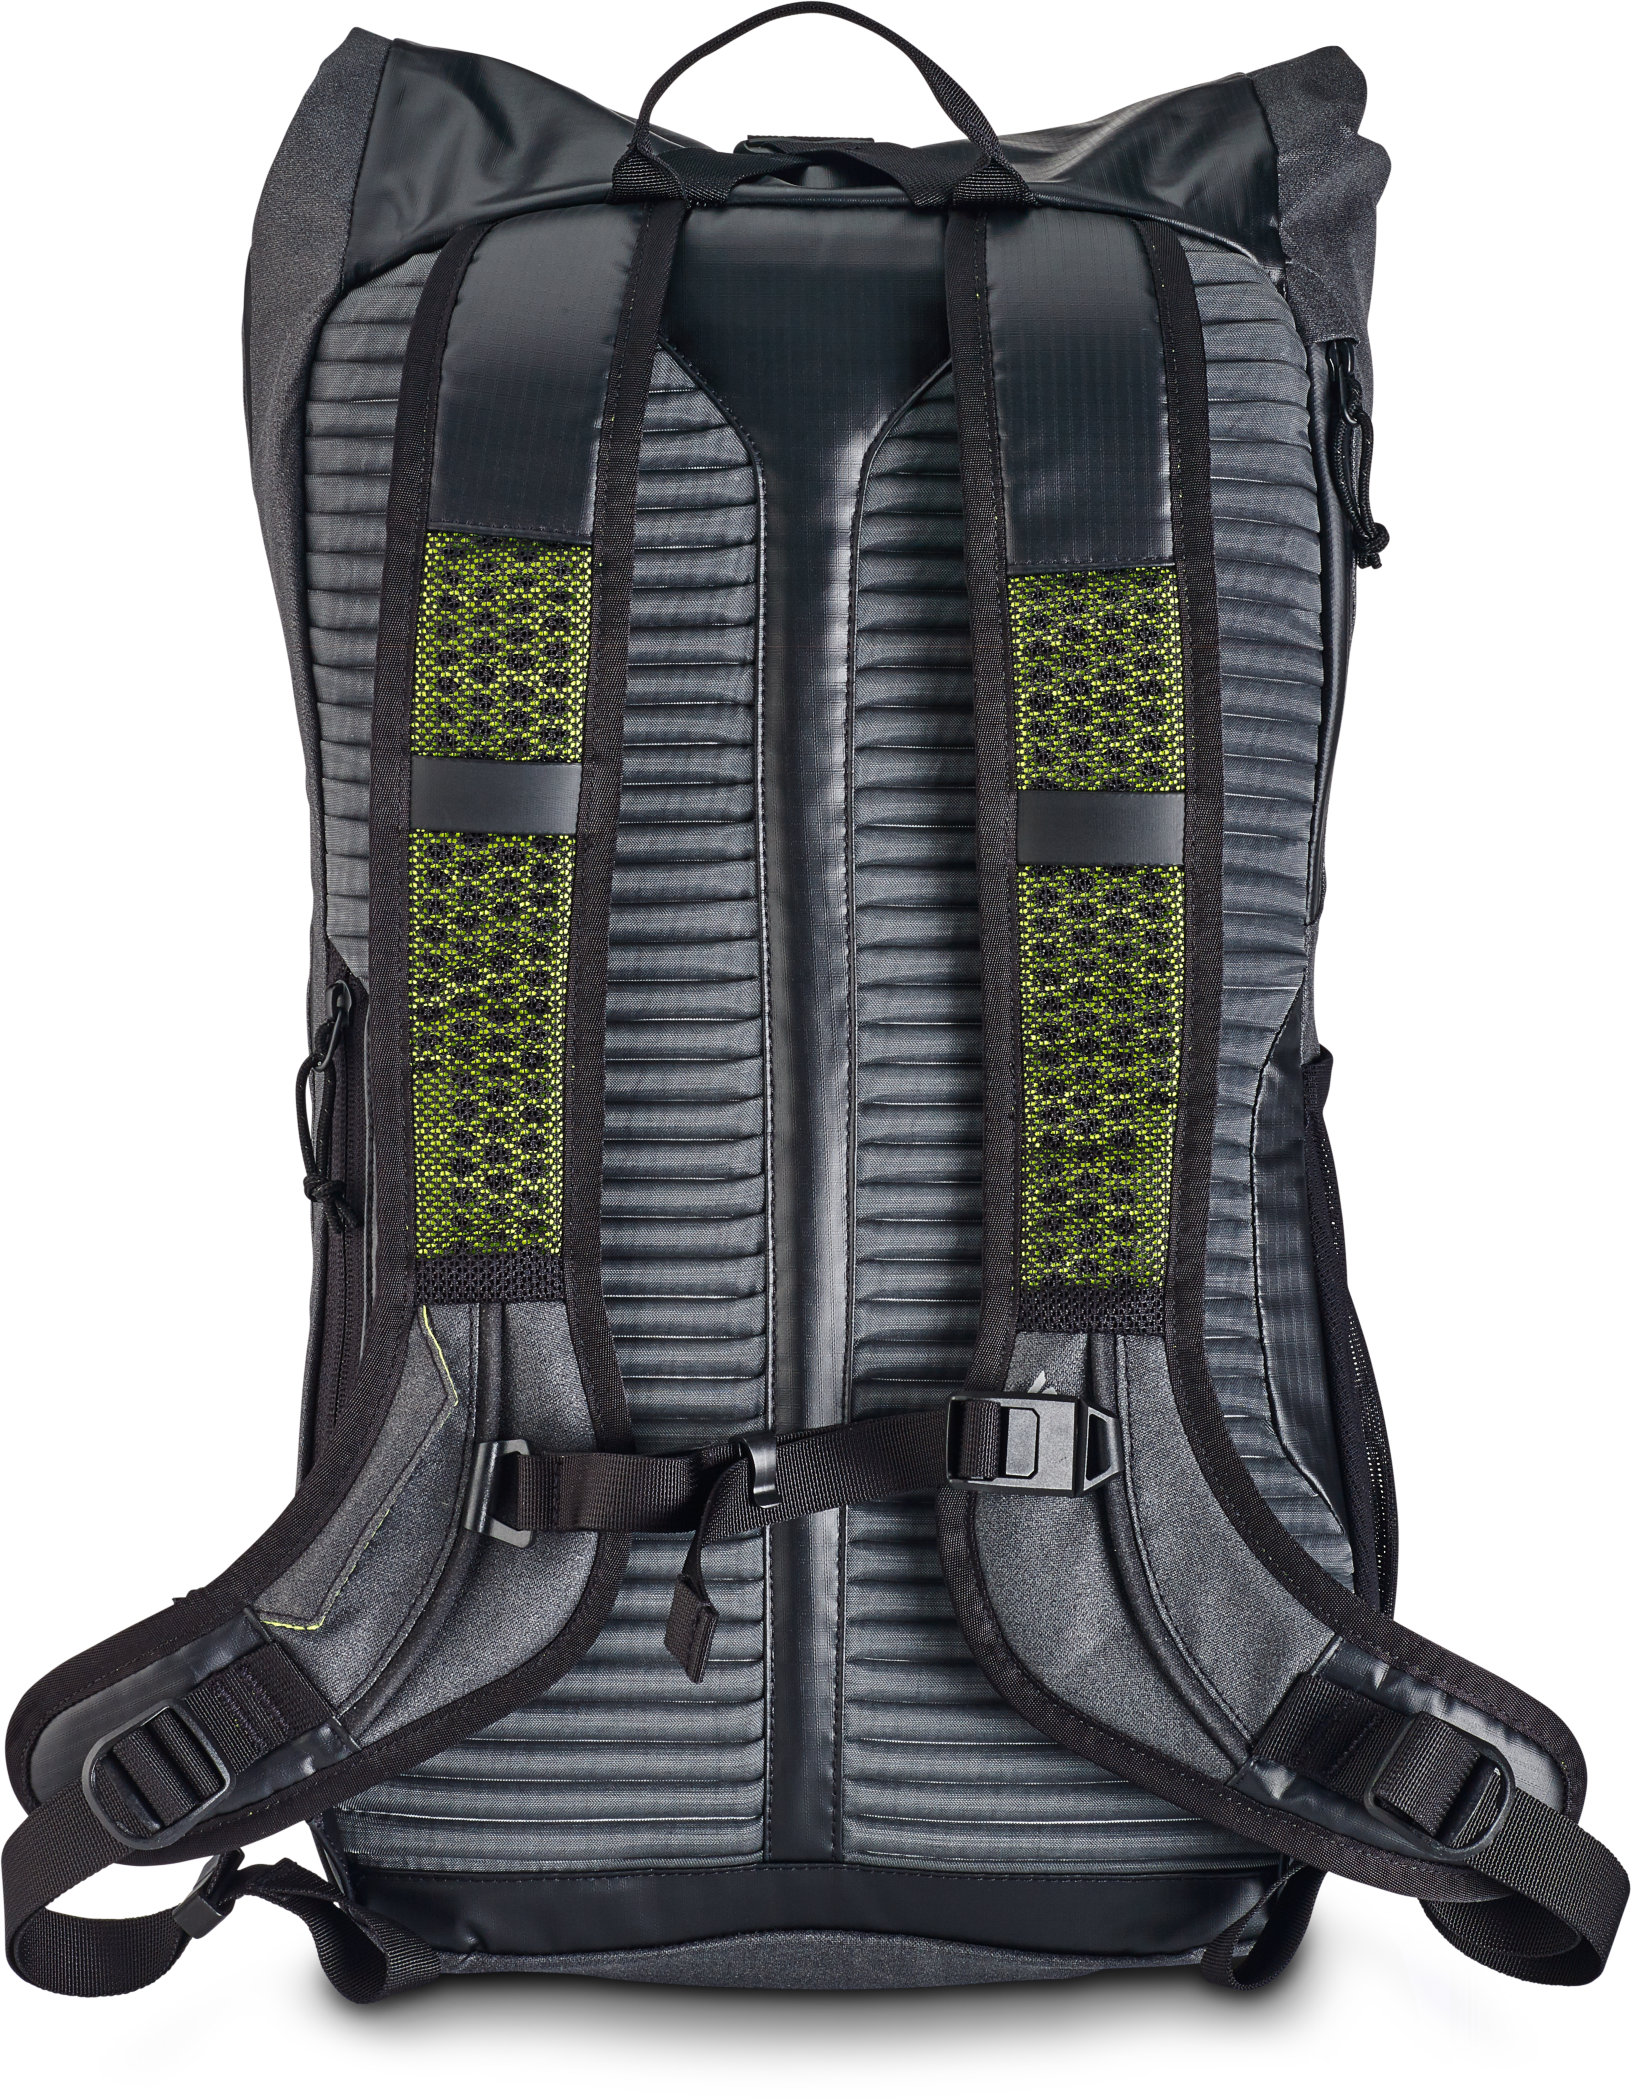 specialized base miles stormproof backpack